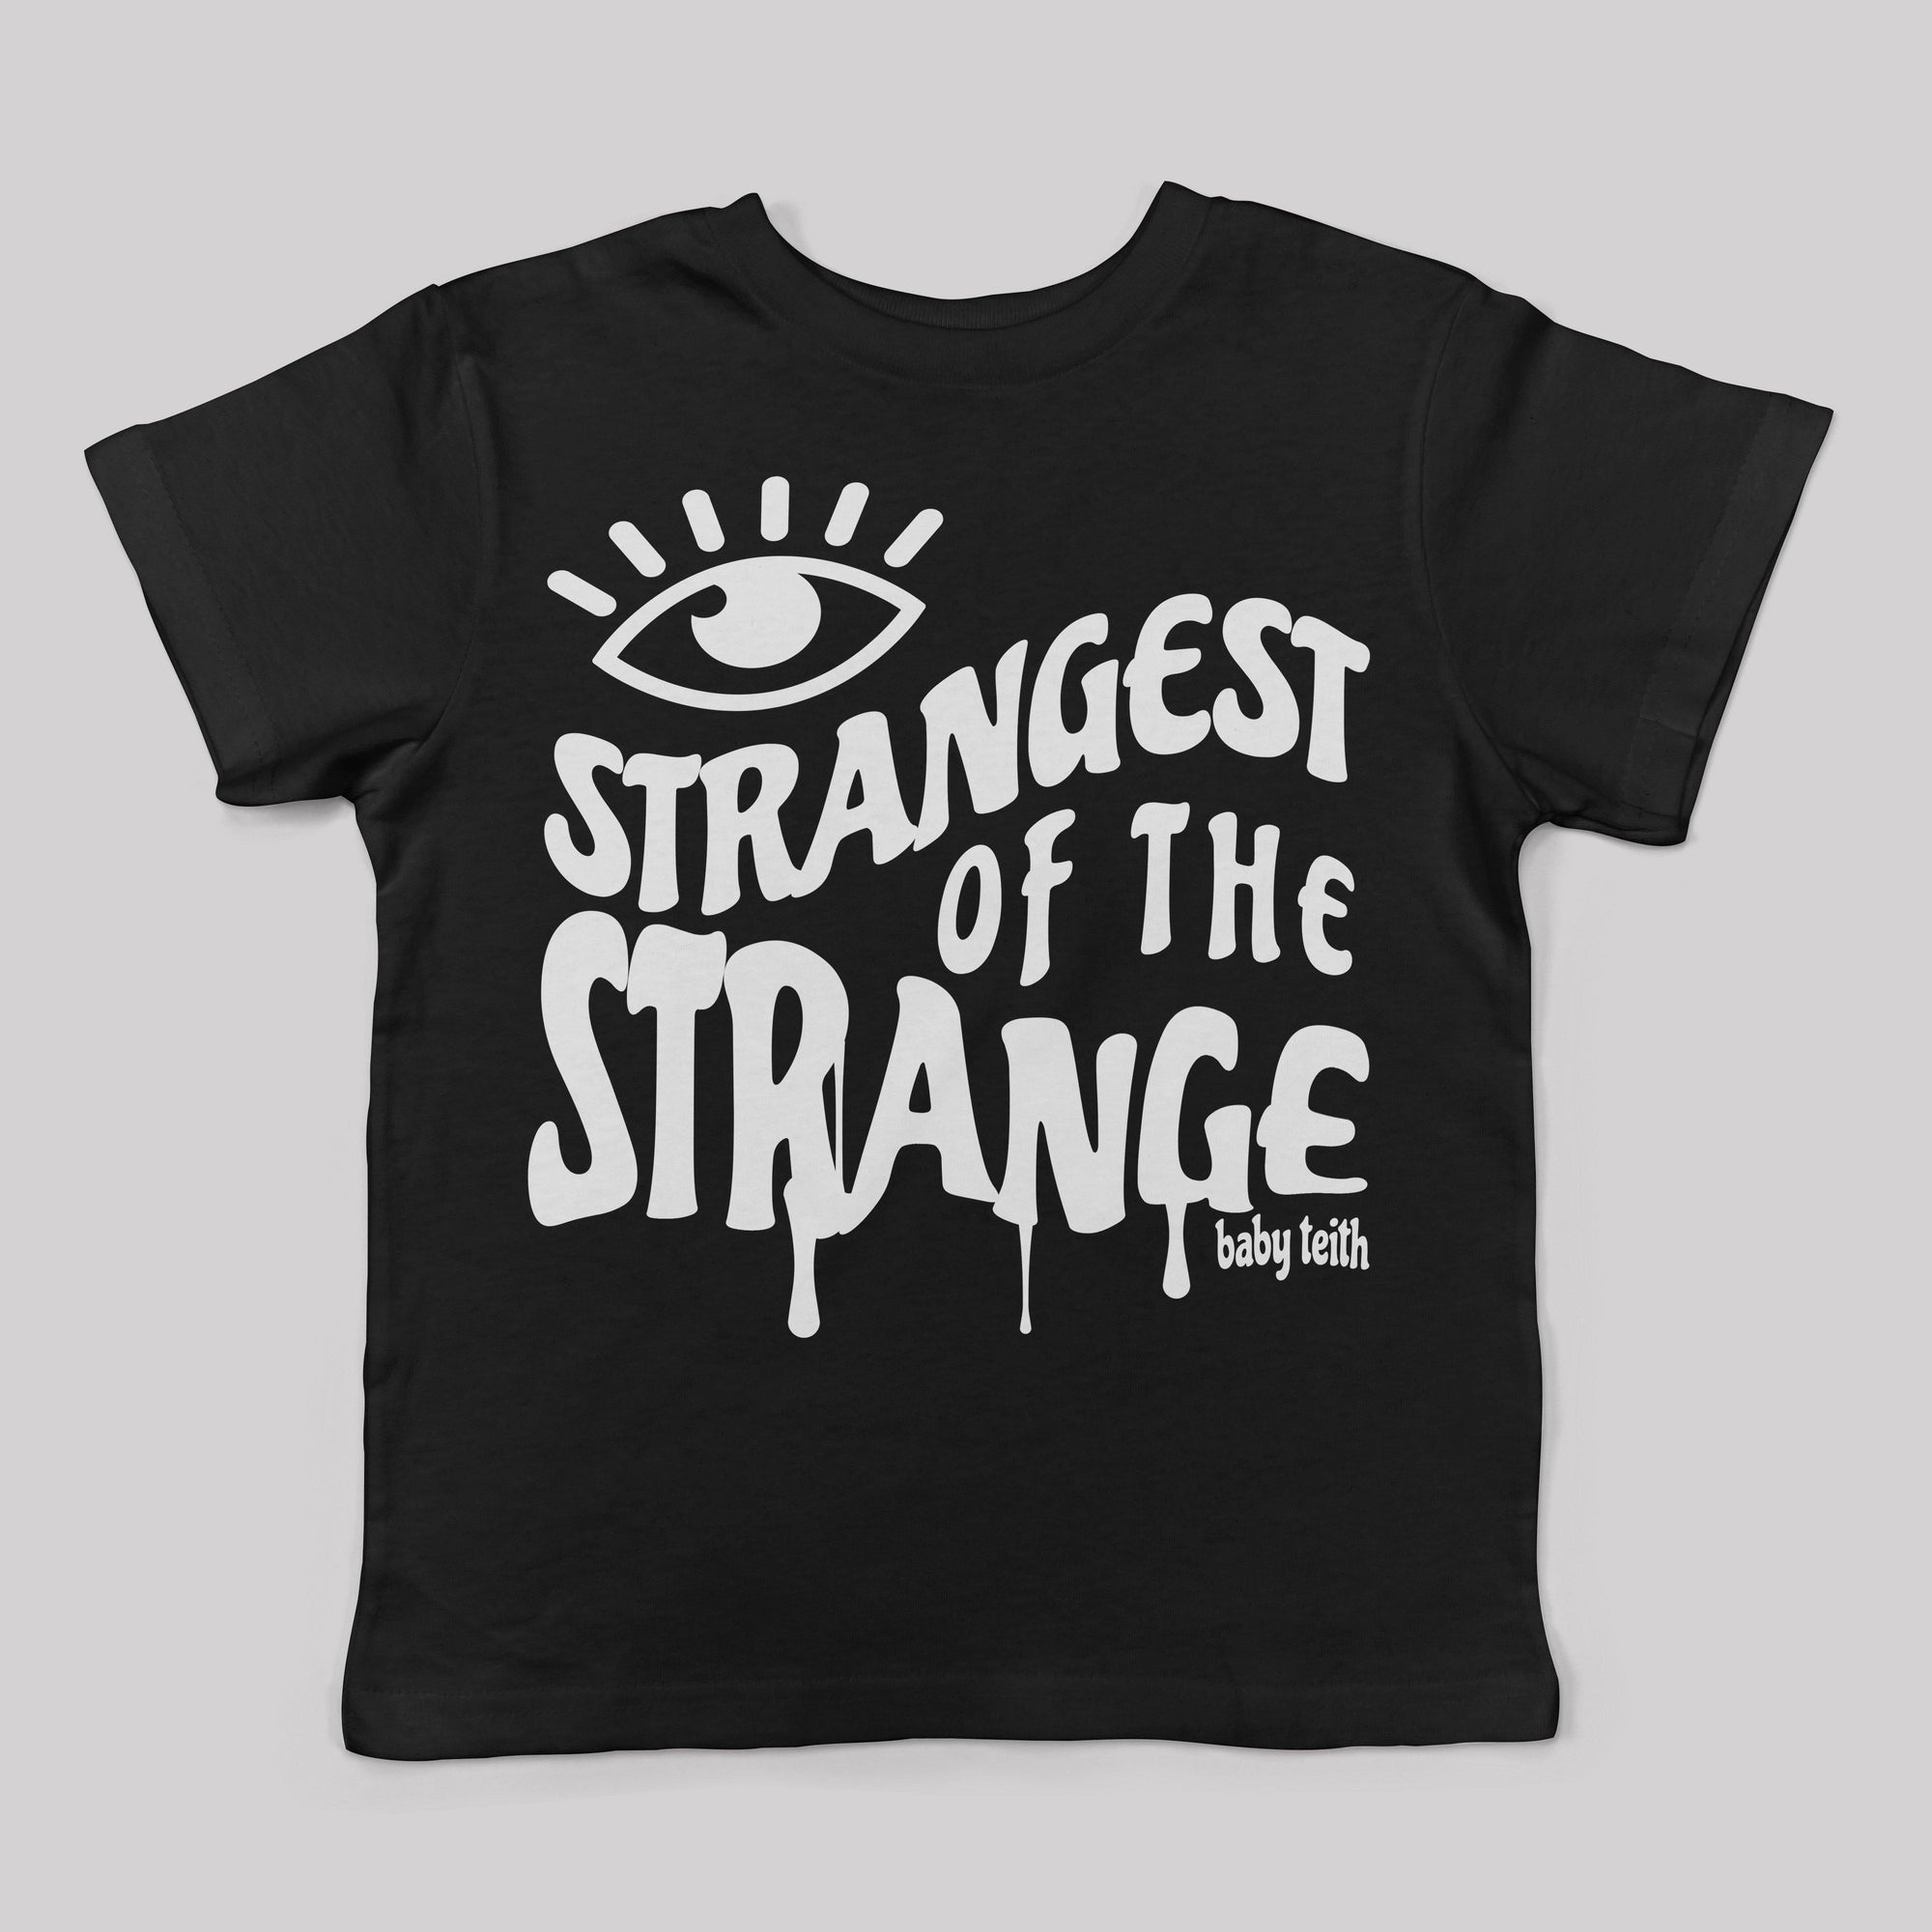 &quot;Strangest of the Strange&quot; Tee for Kids - Baby Teith